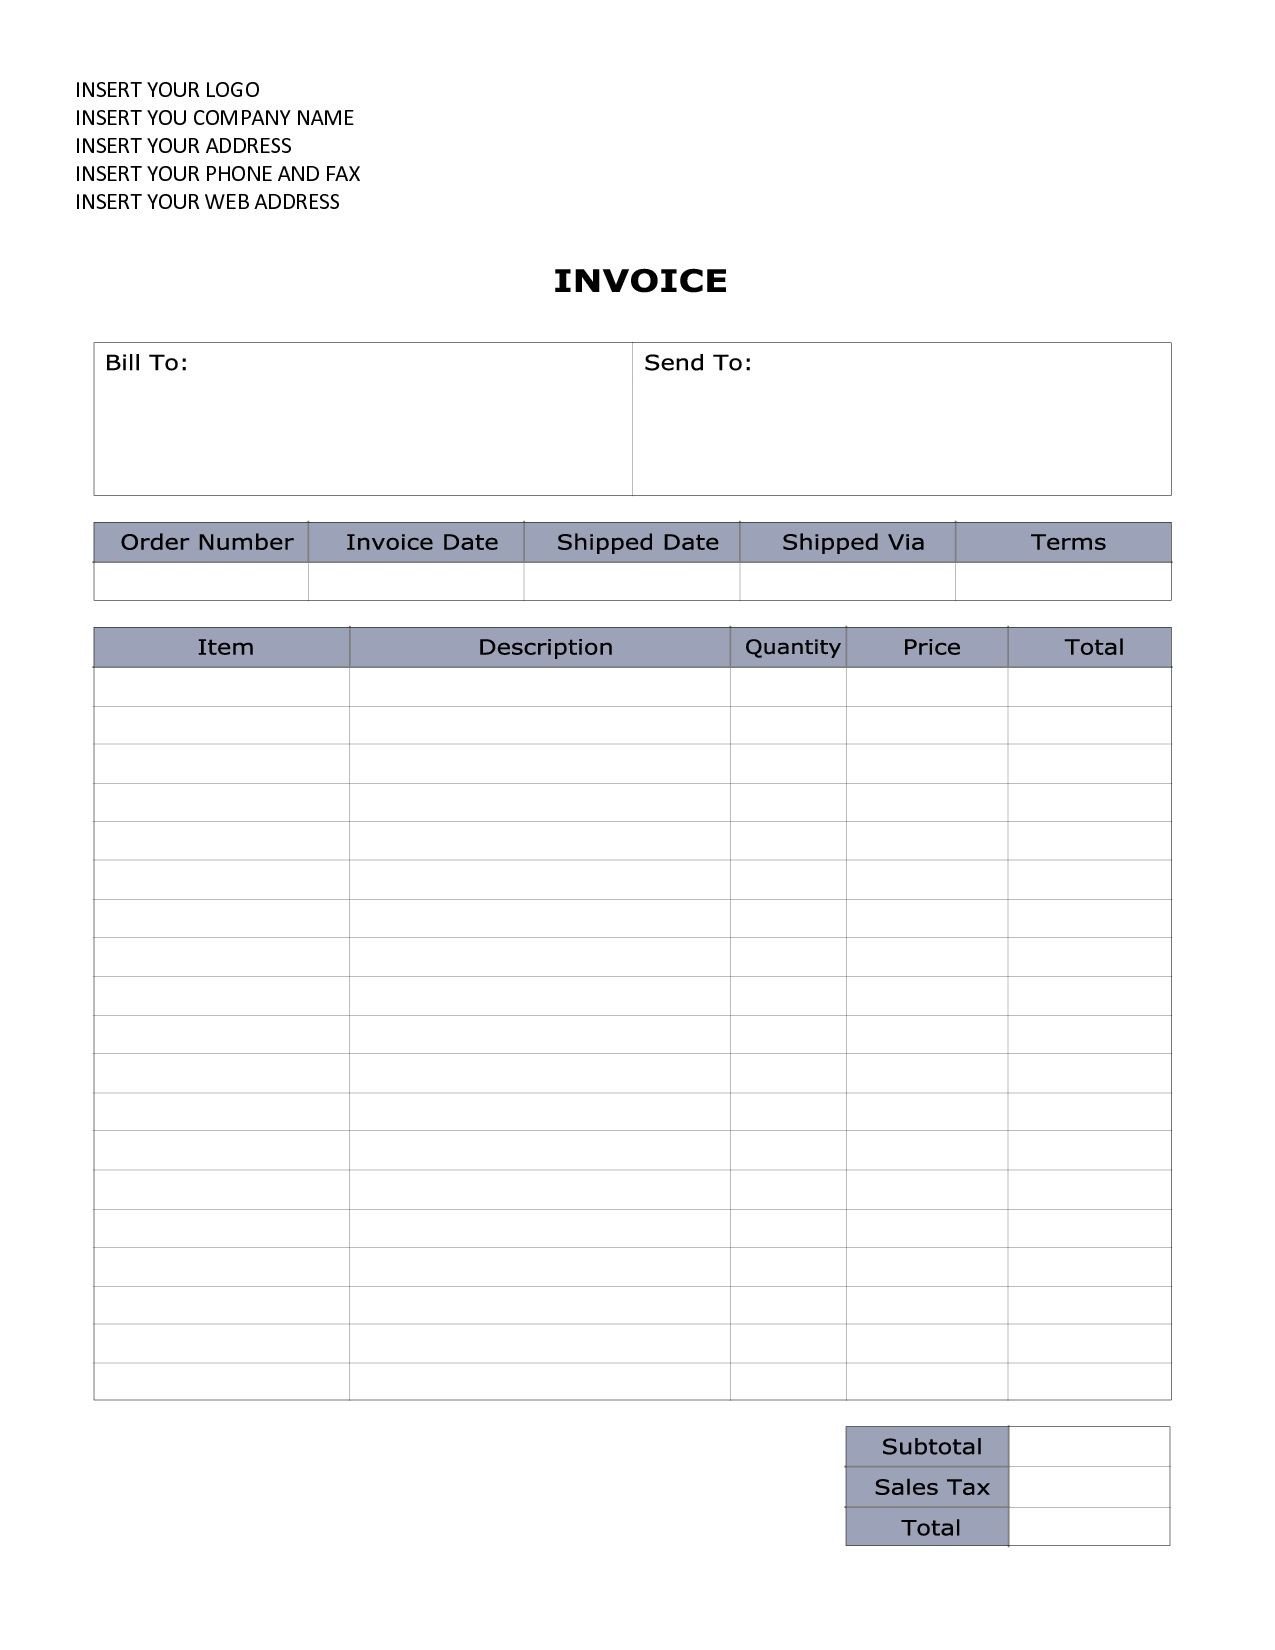 word document invoice template sales invoice sample word